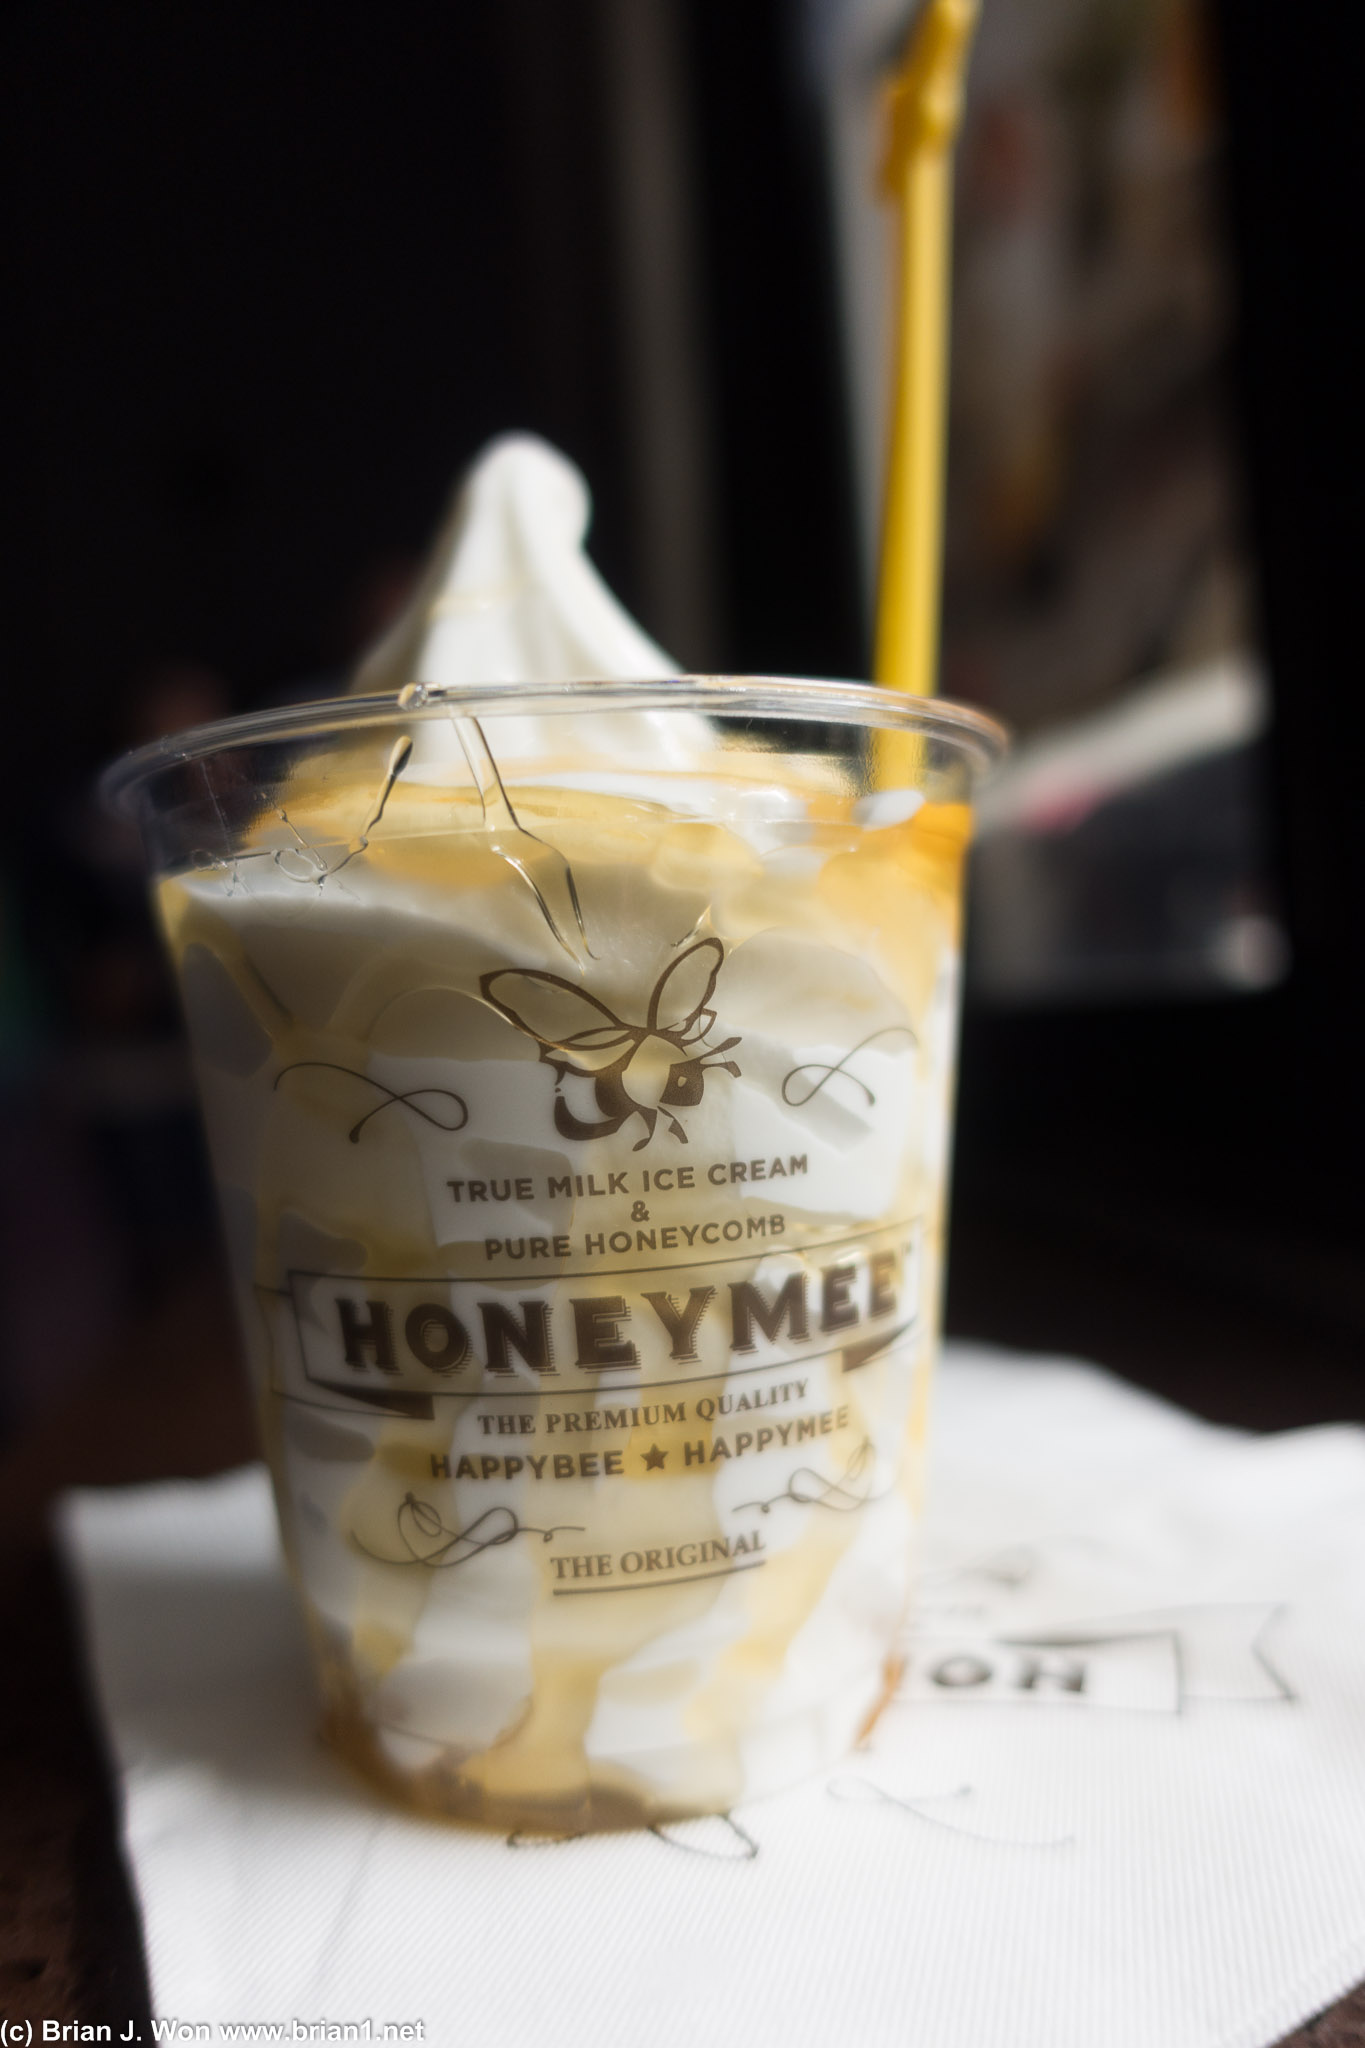 Kim might have an addiction to Honeymee...